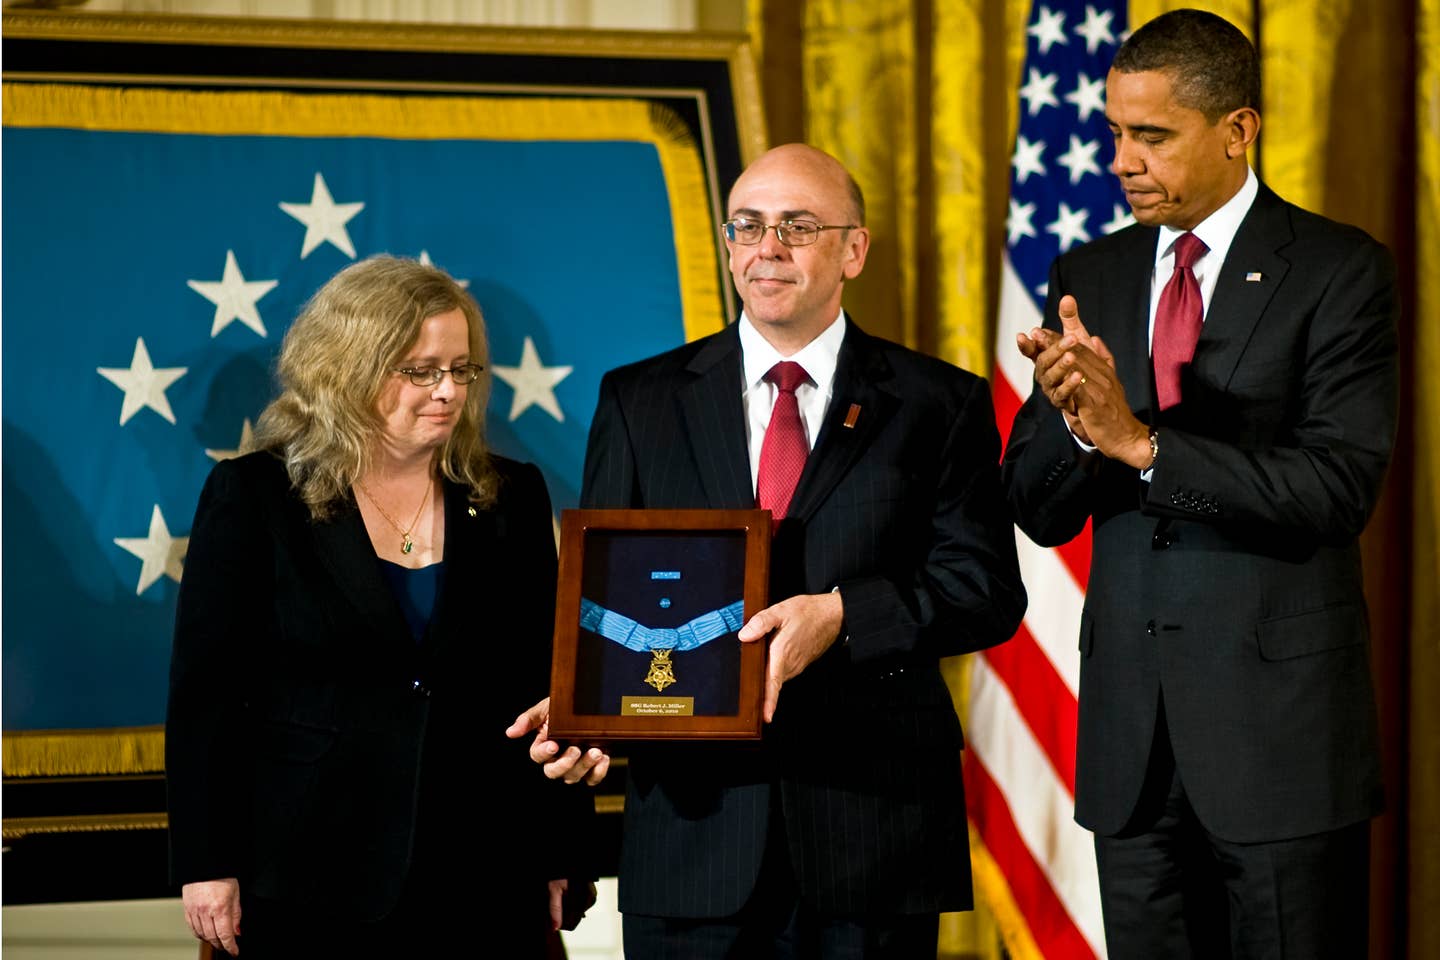 President Barack Obama presents the Medal of Honor posthumously to Phil and Maureen Miller, the parents of U.S. Army Staff Sgt. Robert J. Miller, in the East Room of the White House, Oct. 6, 2010. Miller received the honor for his heroic actions on Jan. 25, 2008, in Afghanistan where he sacrificed his life to save the lives of his teammates and 15 Afghanistan soldiers.